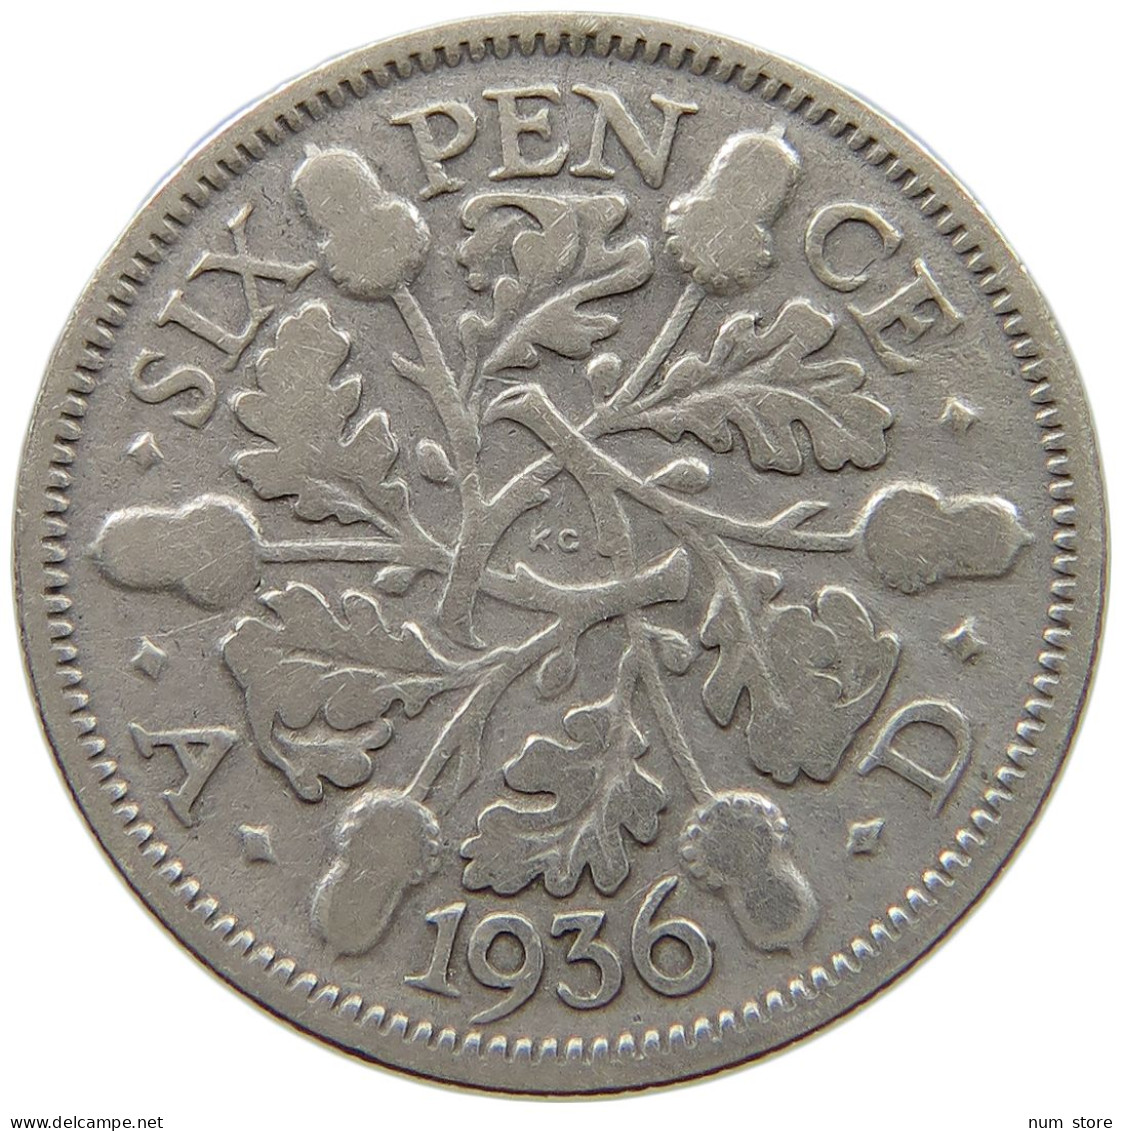 GREAT BRITAIN SIXPENCE 1936 #a081 0885 - H. 6 Pence